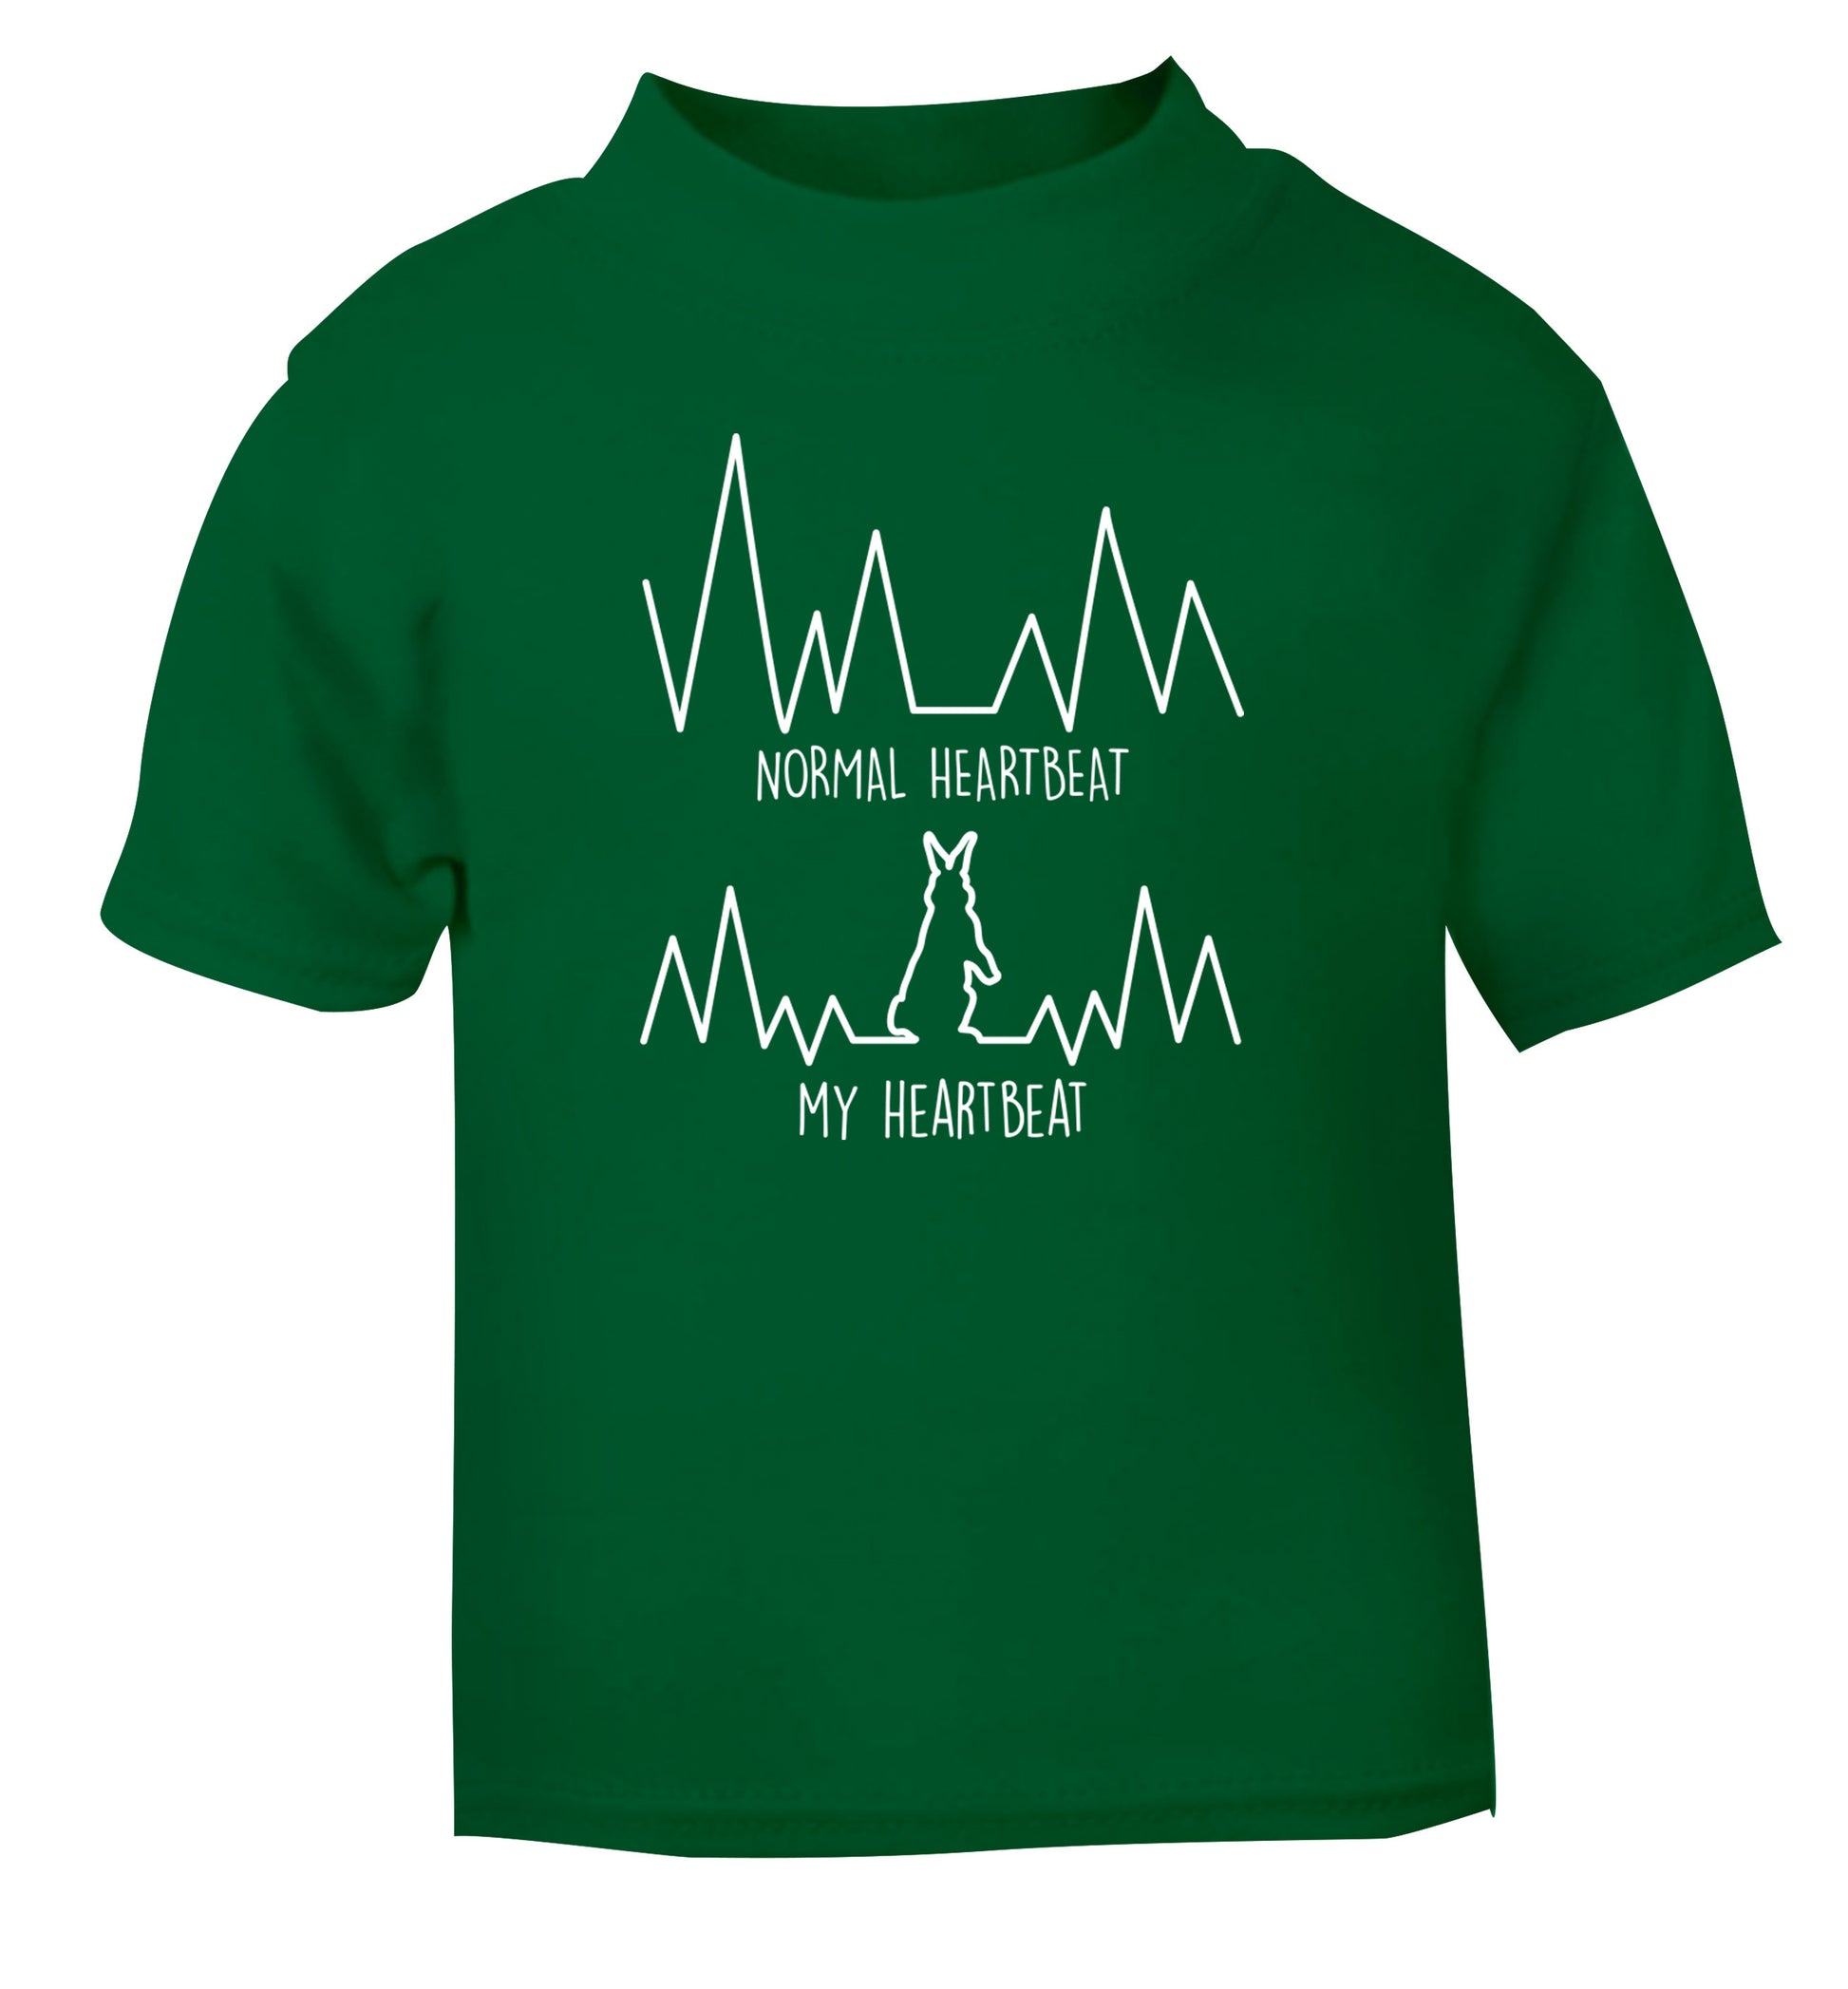 Normal heartbeat, my heartbeat rabbit lover green Baby Toddler Tshirt 2 Years